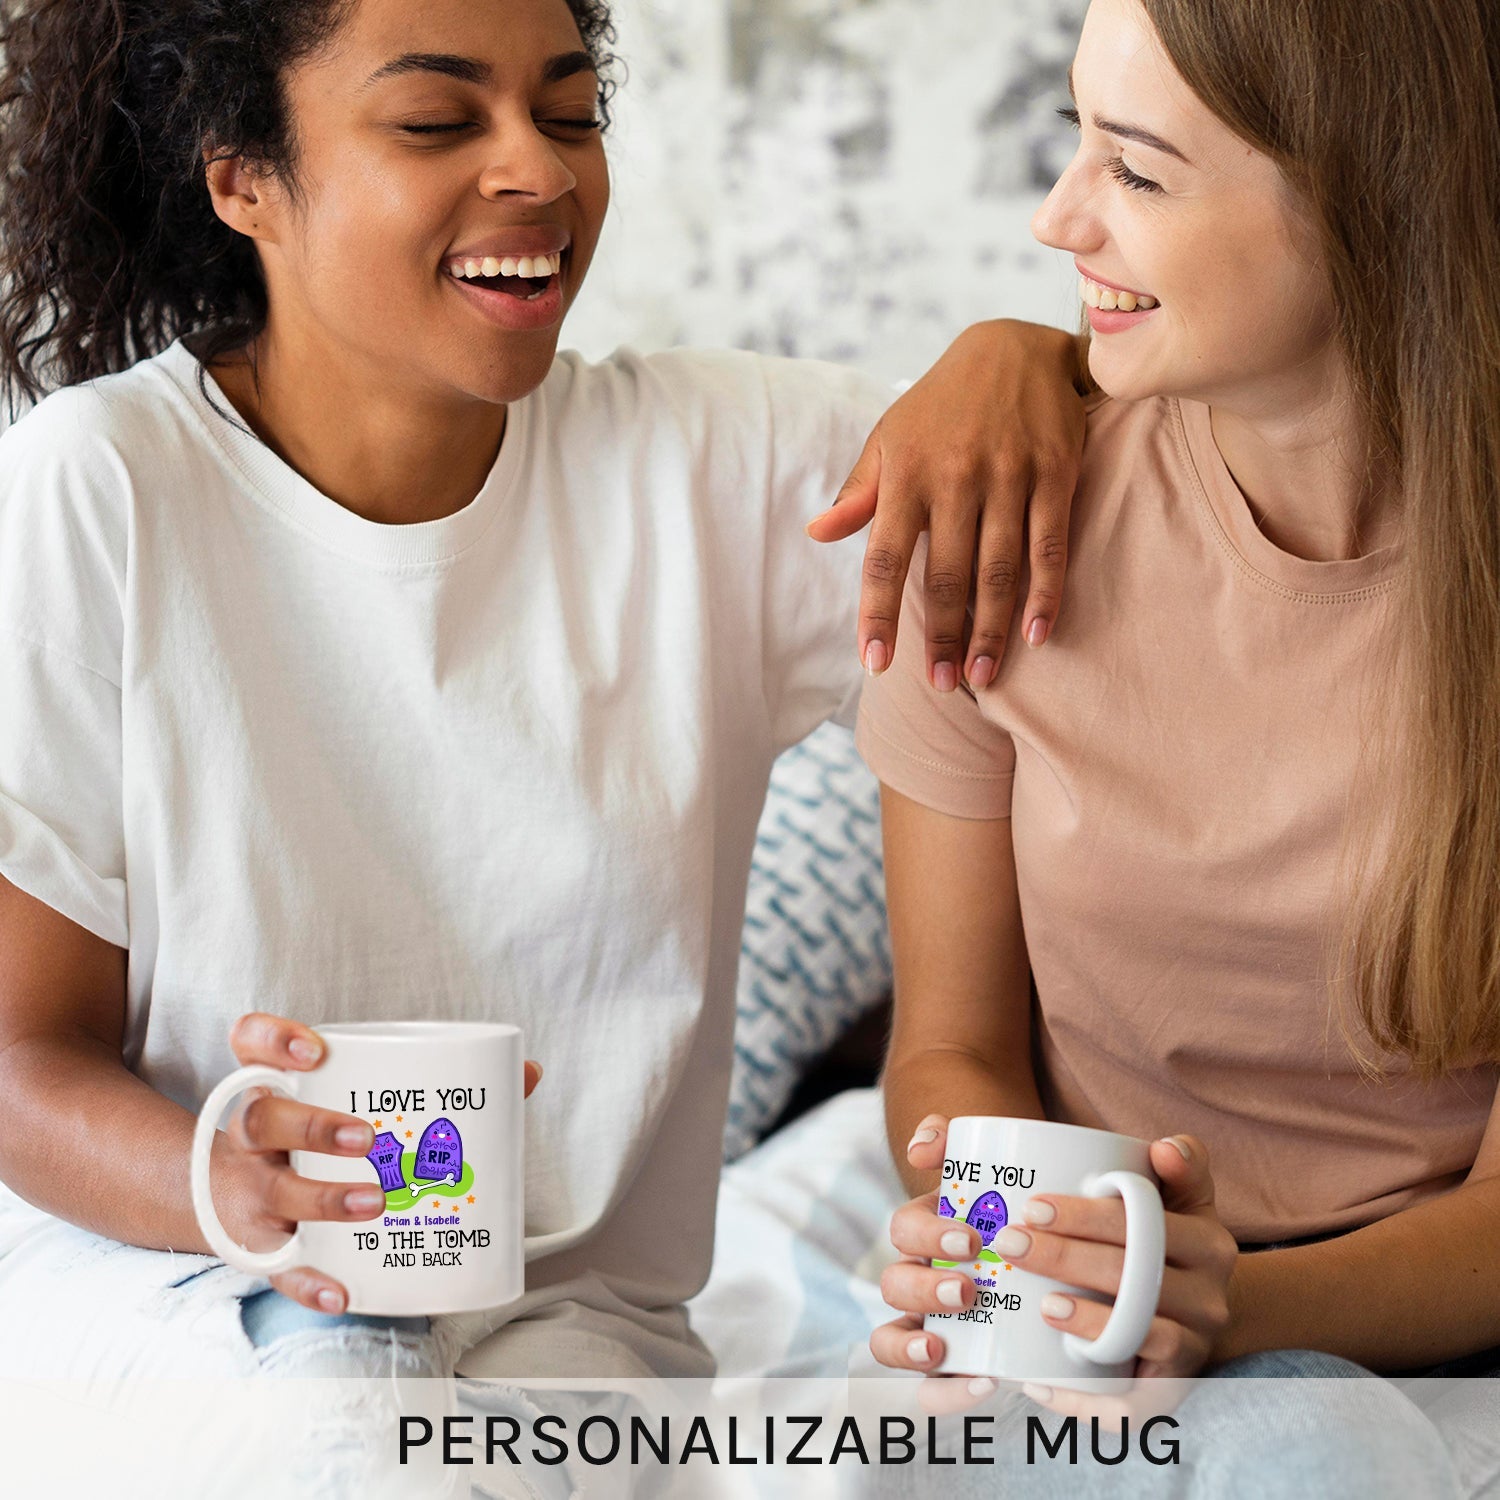 Love You To The Tomb And Back - Personalized Anniversary or Halloween gift for Boyfriend or Girlfriend - Custom Mug - MyMindfulGifts